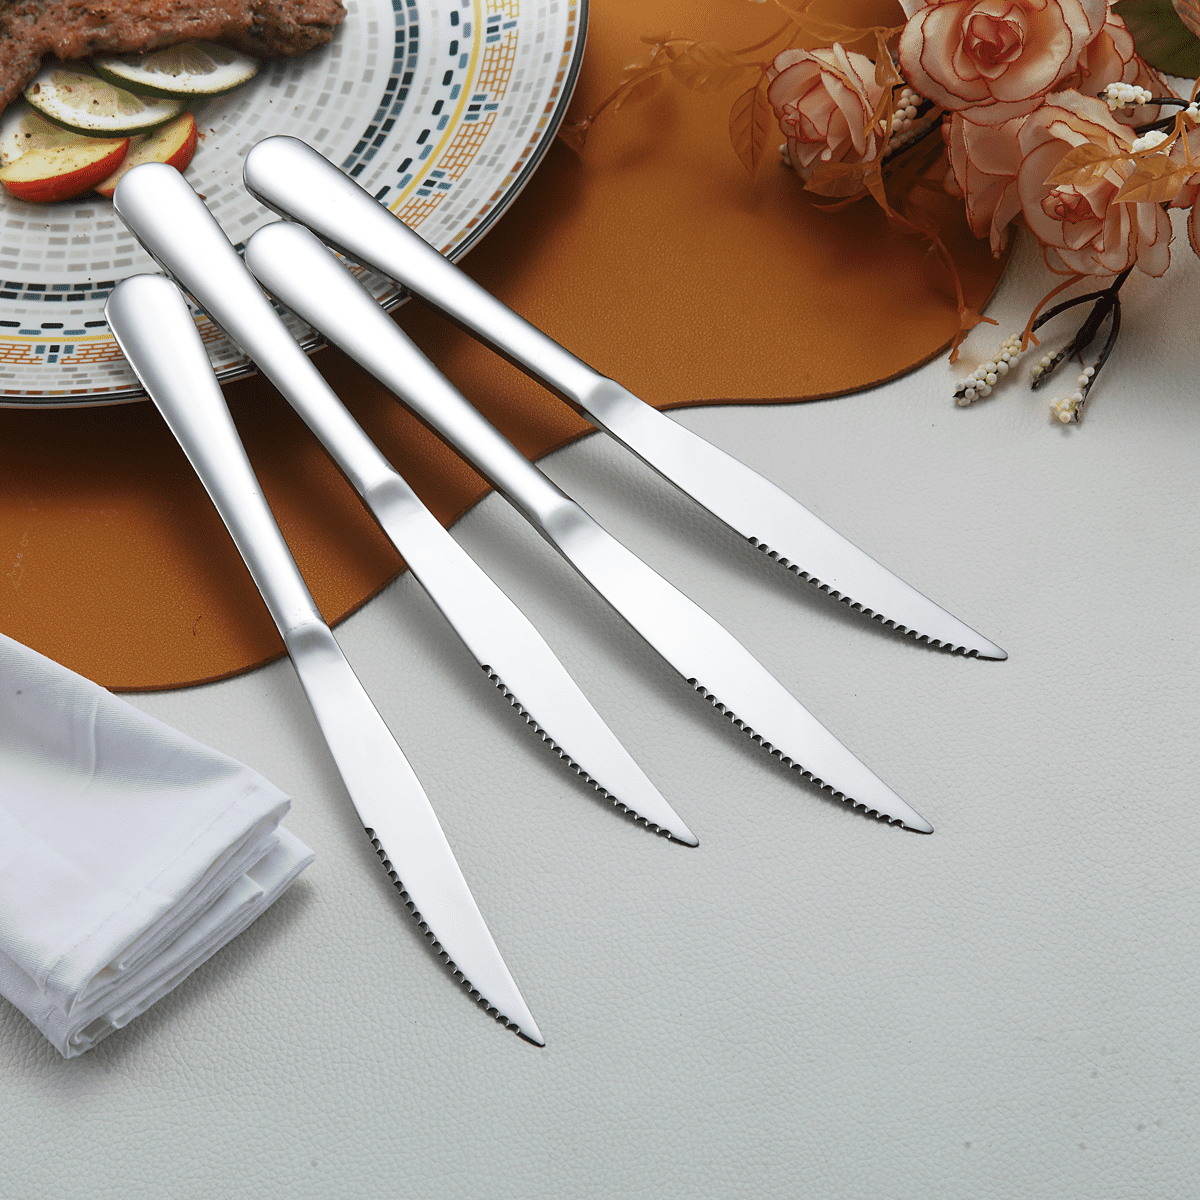 Stainless Steel Serrated Steak Knife Set of 6, BuyGo Gold Color Heavy Duty  Dinner Table Knives for Cutting Meat, Beef, 8.6 Inch, Dishwasher Safe